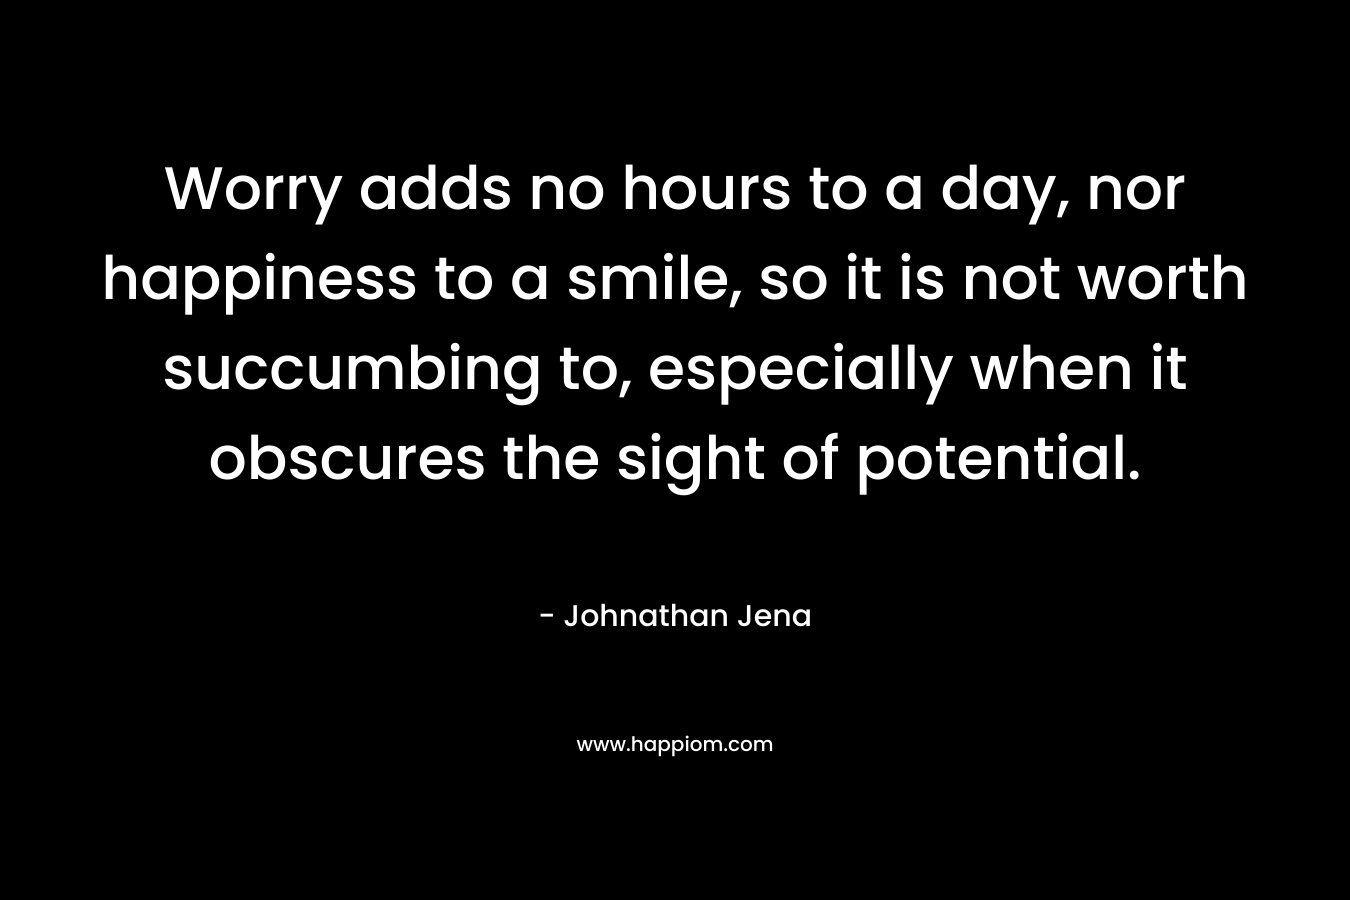 Worry adds no hours to a day, nor happiness to a smile, so it is not worth succumbing to, especially when it obscures the sight of potential.